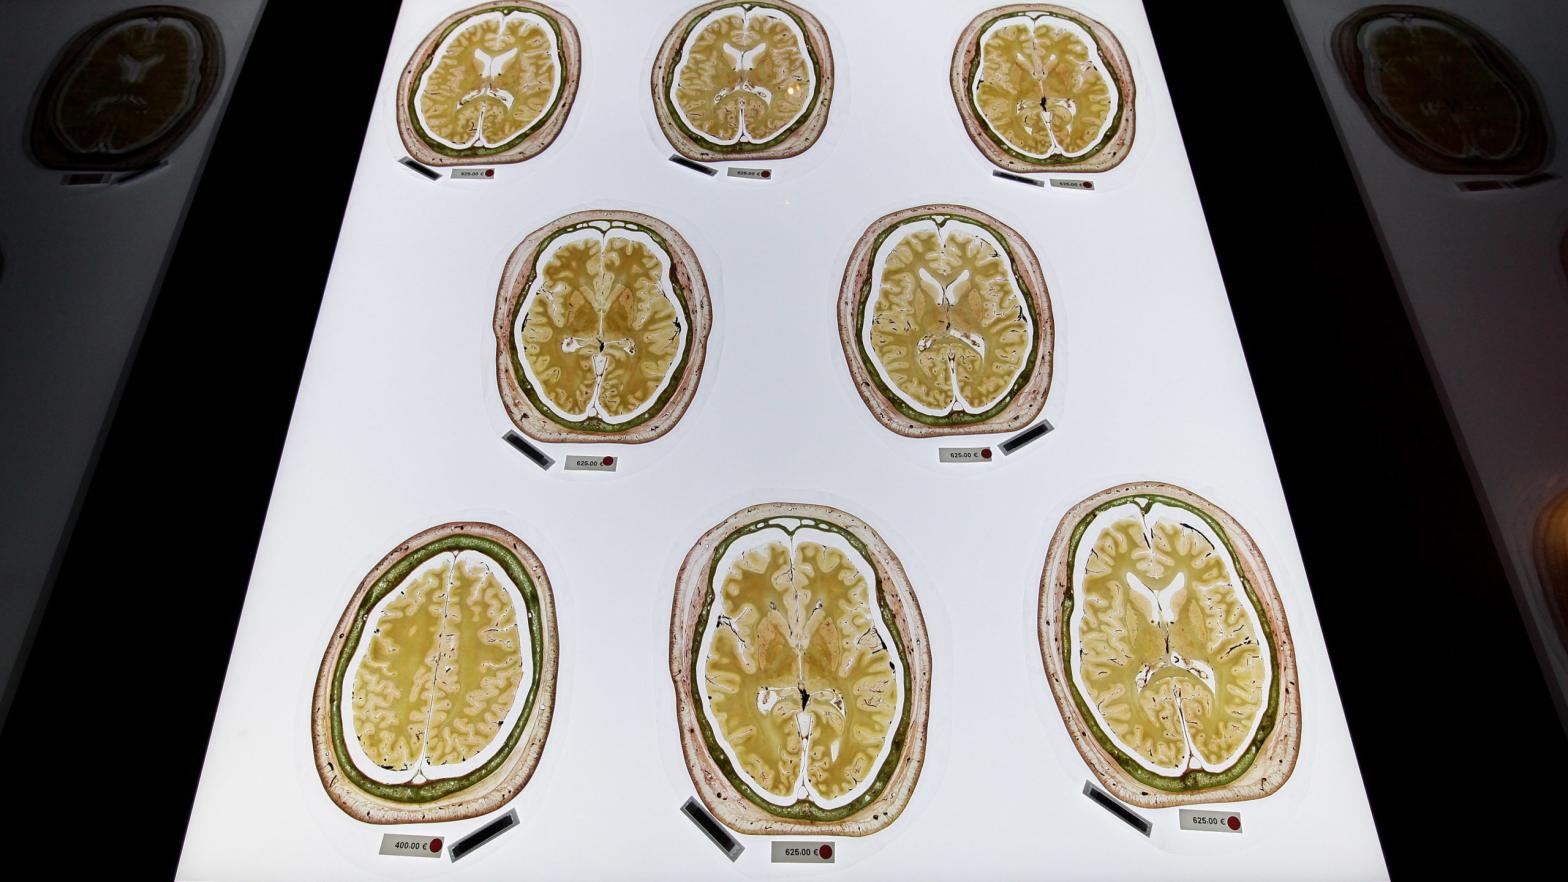 Plastinated slices of the human brain exhibited at the Plastinarium, a museum, teaching centre, and body preparations facility created by anatomist Gunther von Hagens, in Guben, Germany. (Photo: Sean Gallup, Getty Images)